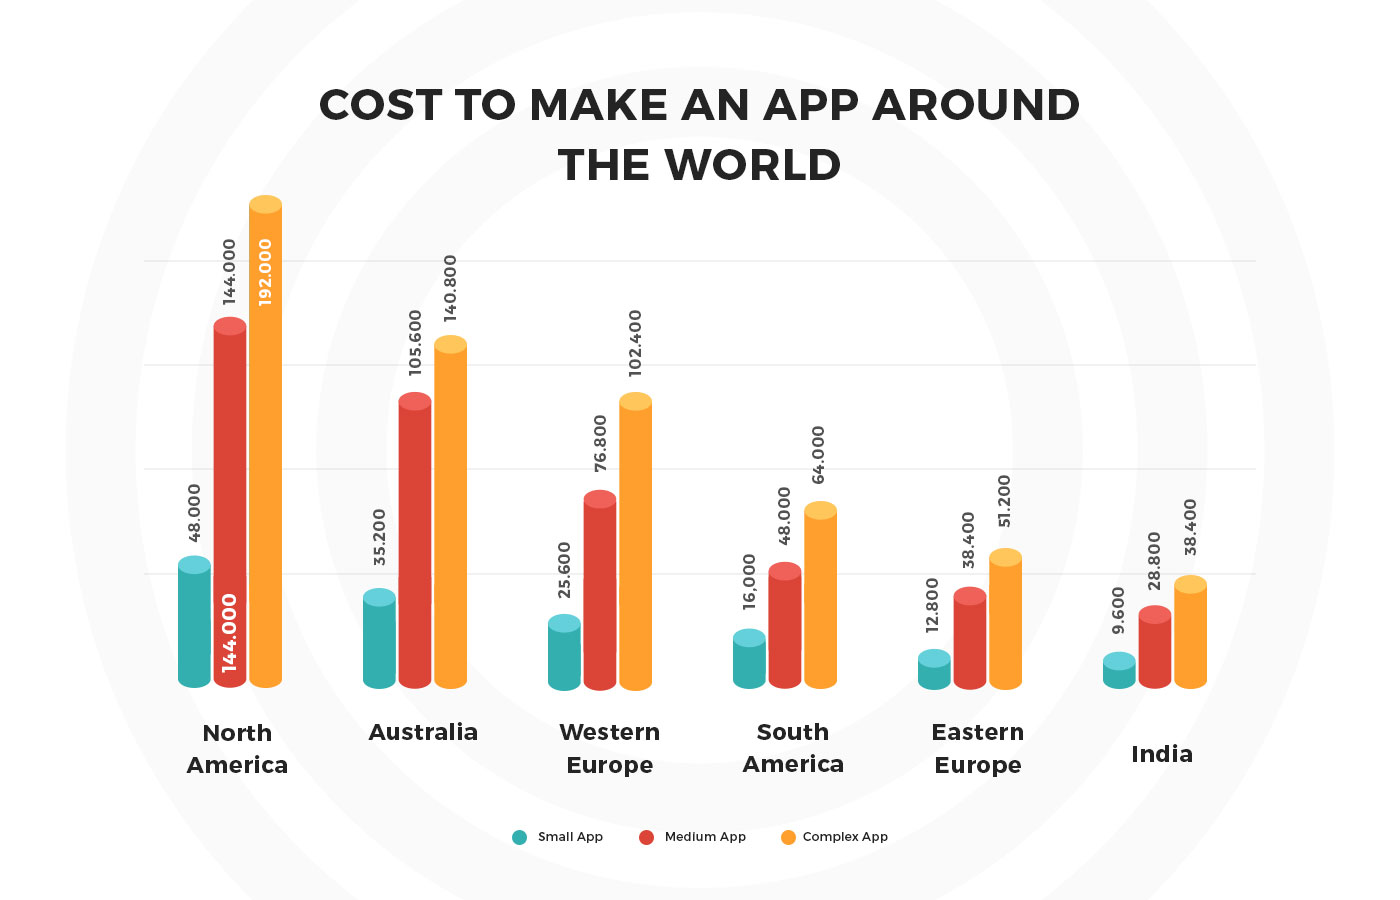 costs to create an app in different regions